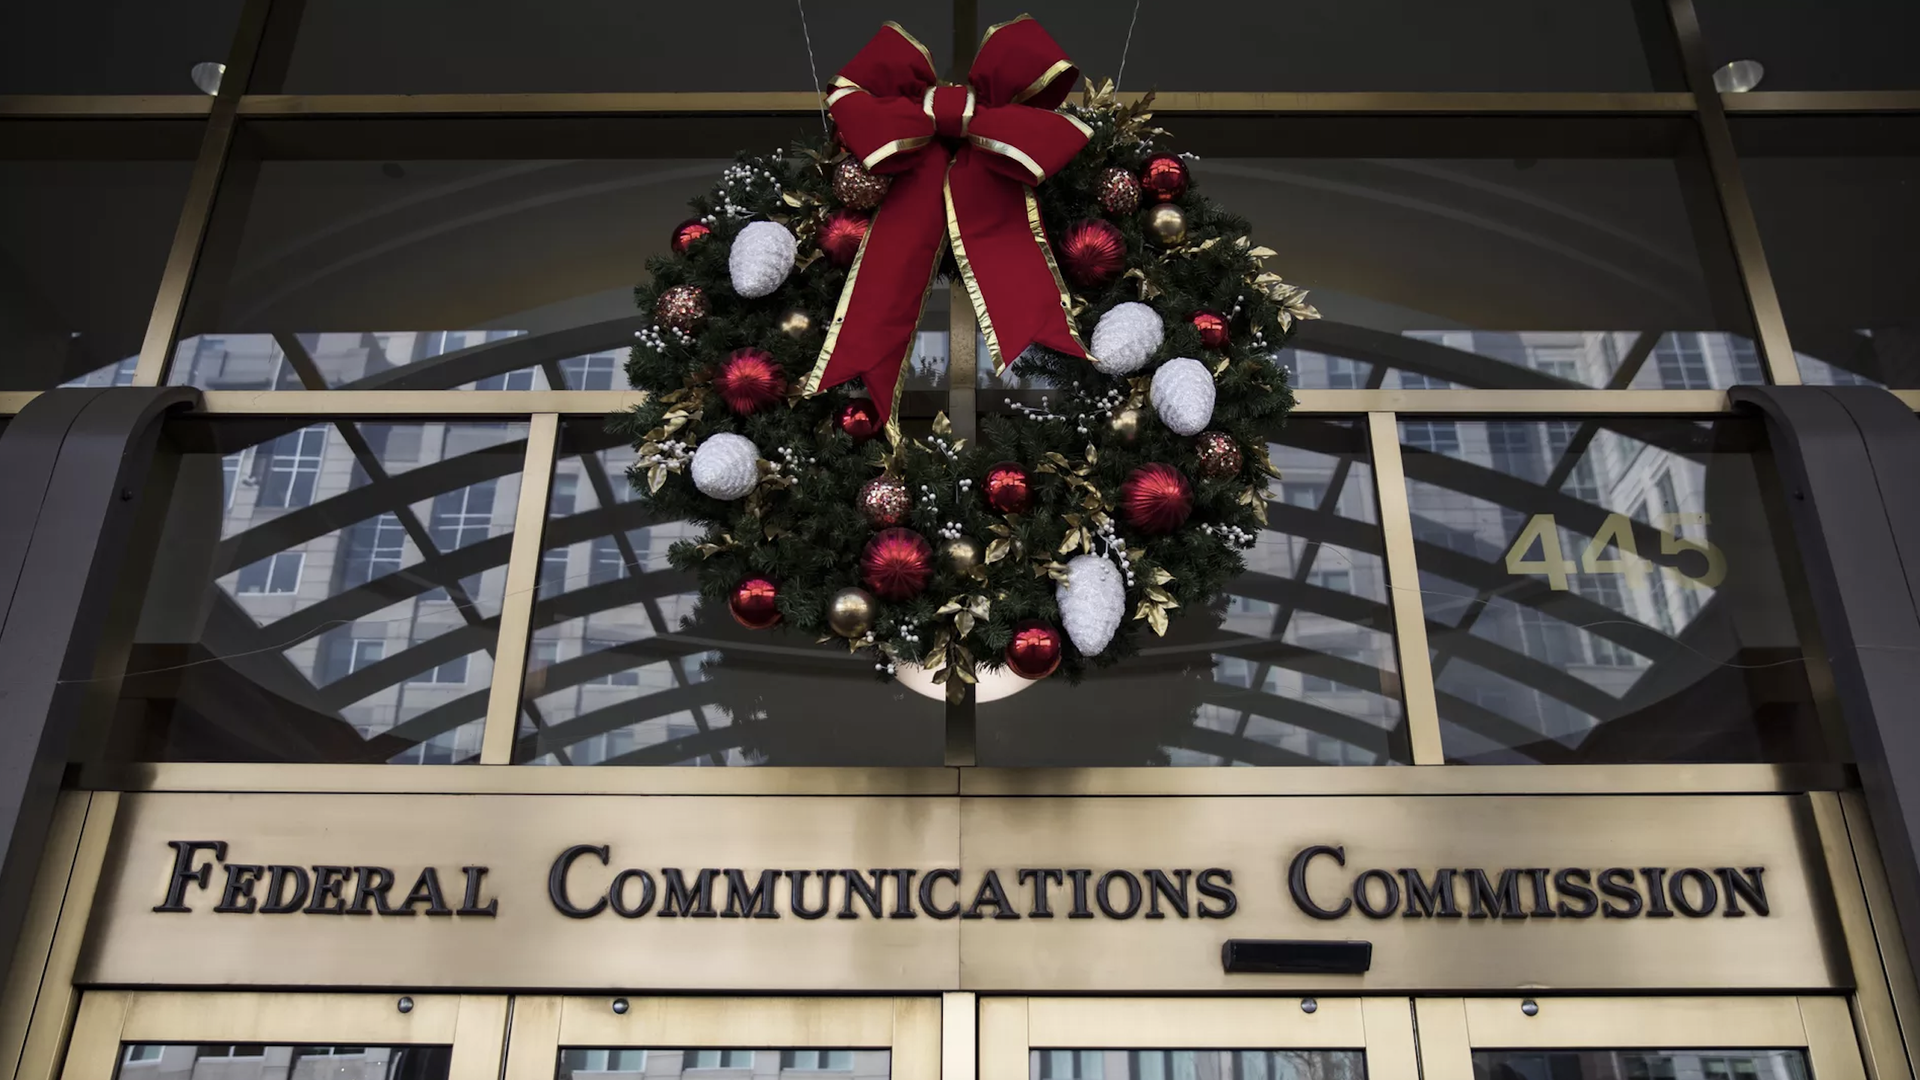 An image of the FCC building with a Christmas wreath above the agency's name.